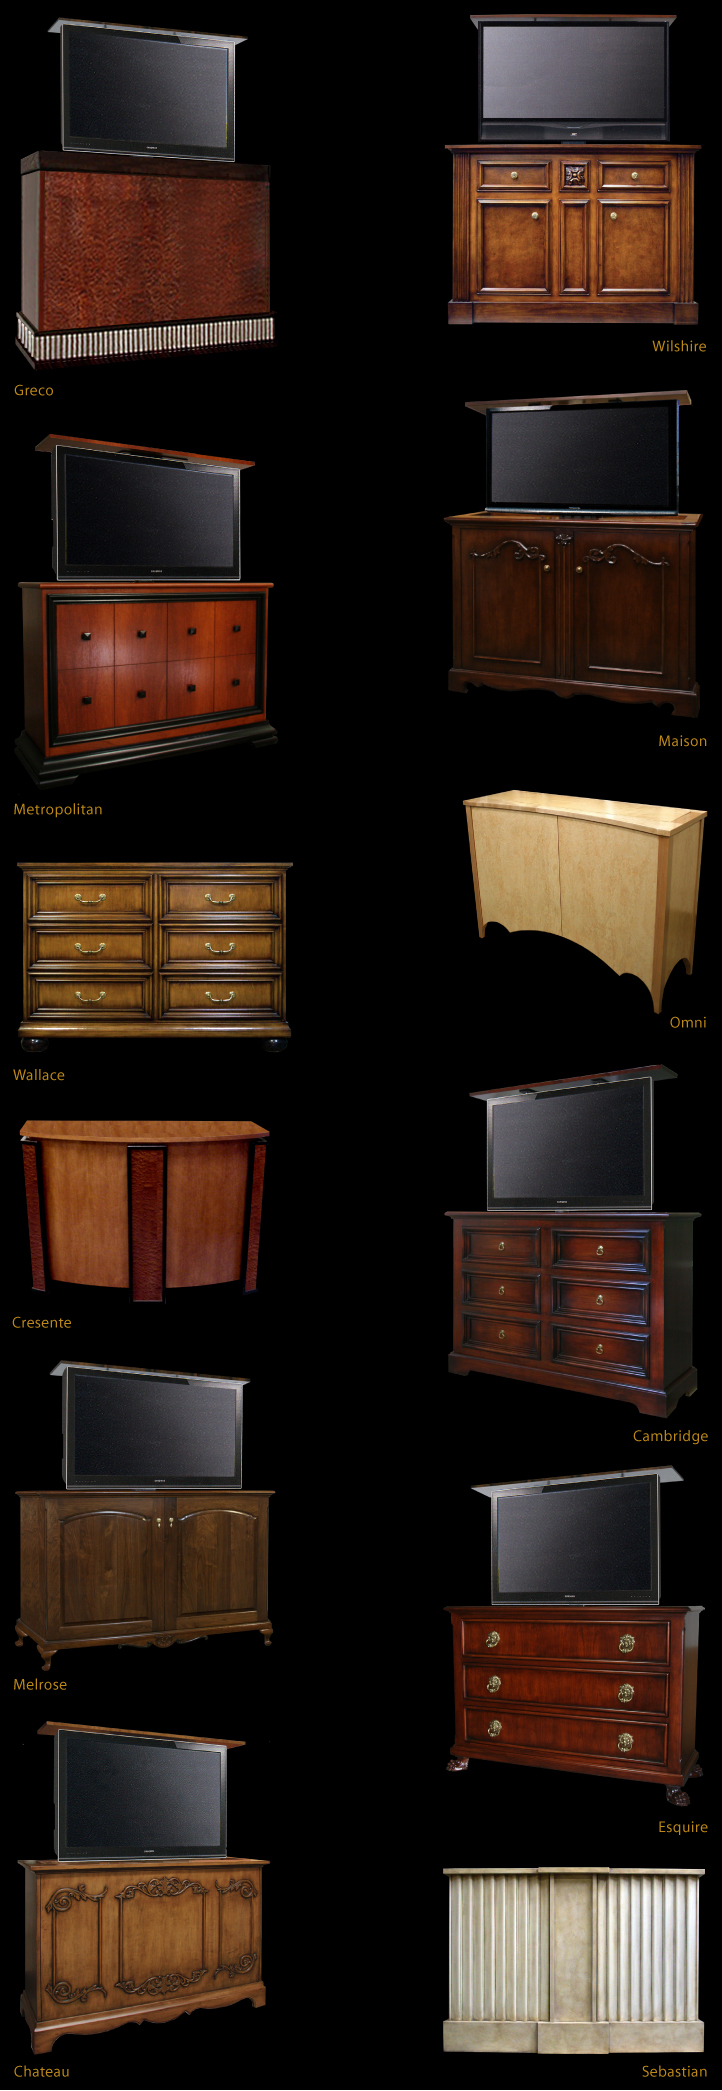  Neo-clasic TV Lift Cabinets, French TV Lift Cabinets, ContemporaryTV Lift Cabinets, 
Traditional TV Lift Cabinets